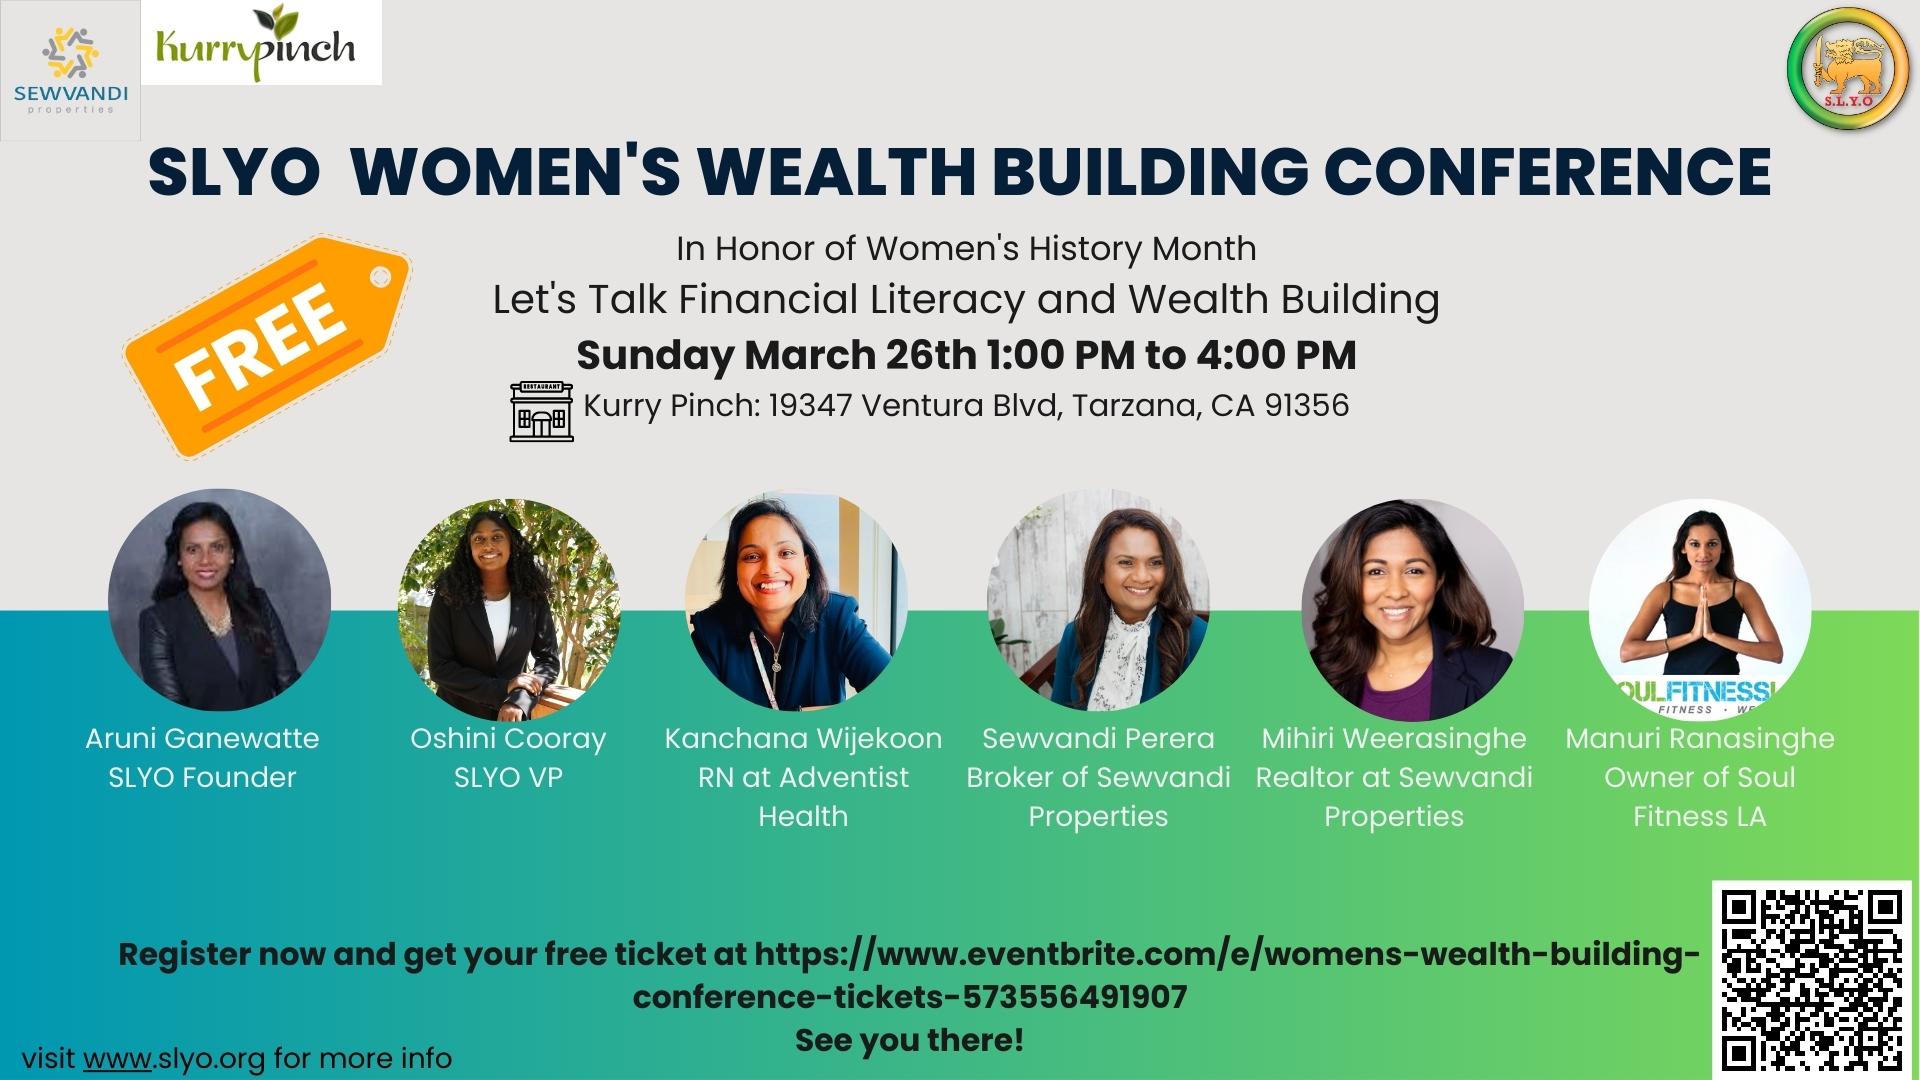 SLYO women's wealth building conference